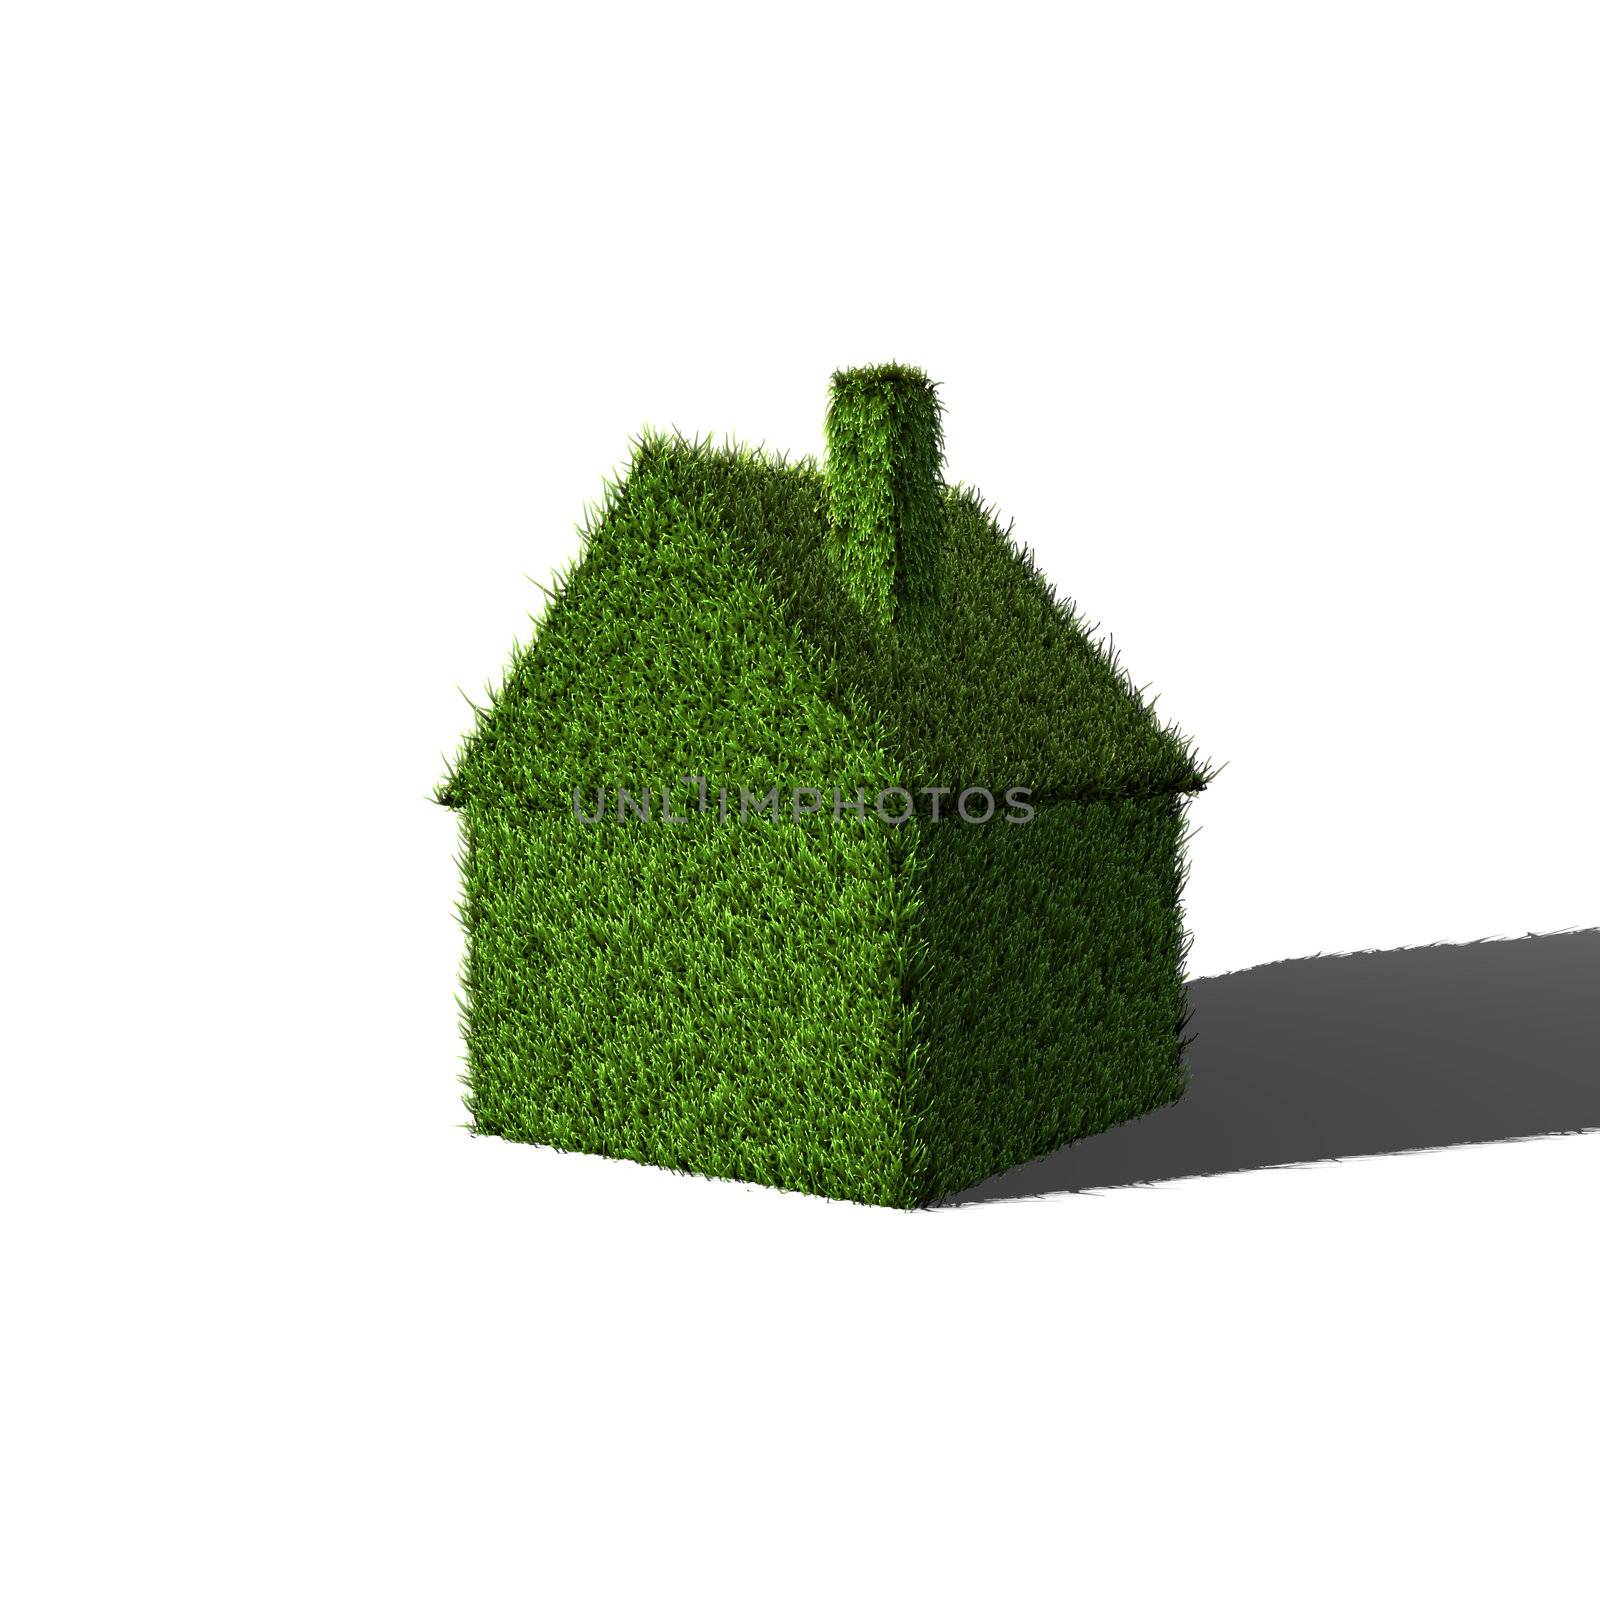 Image of a 3D house made of green grass.